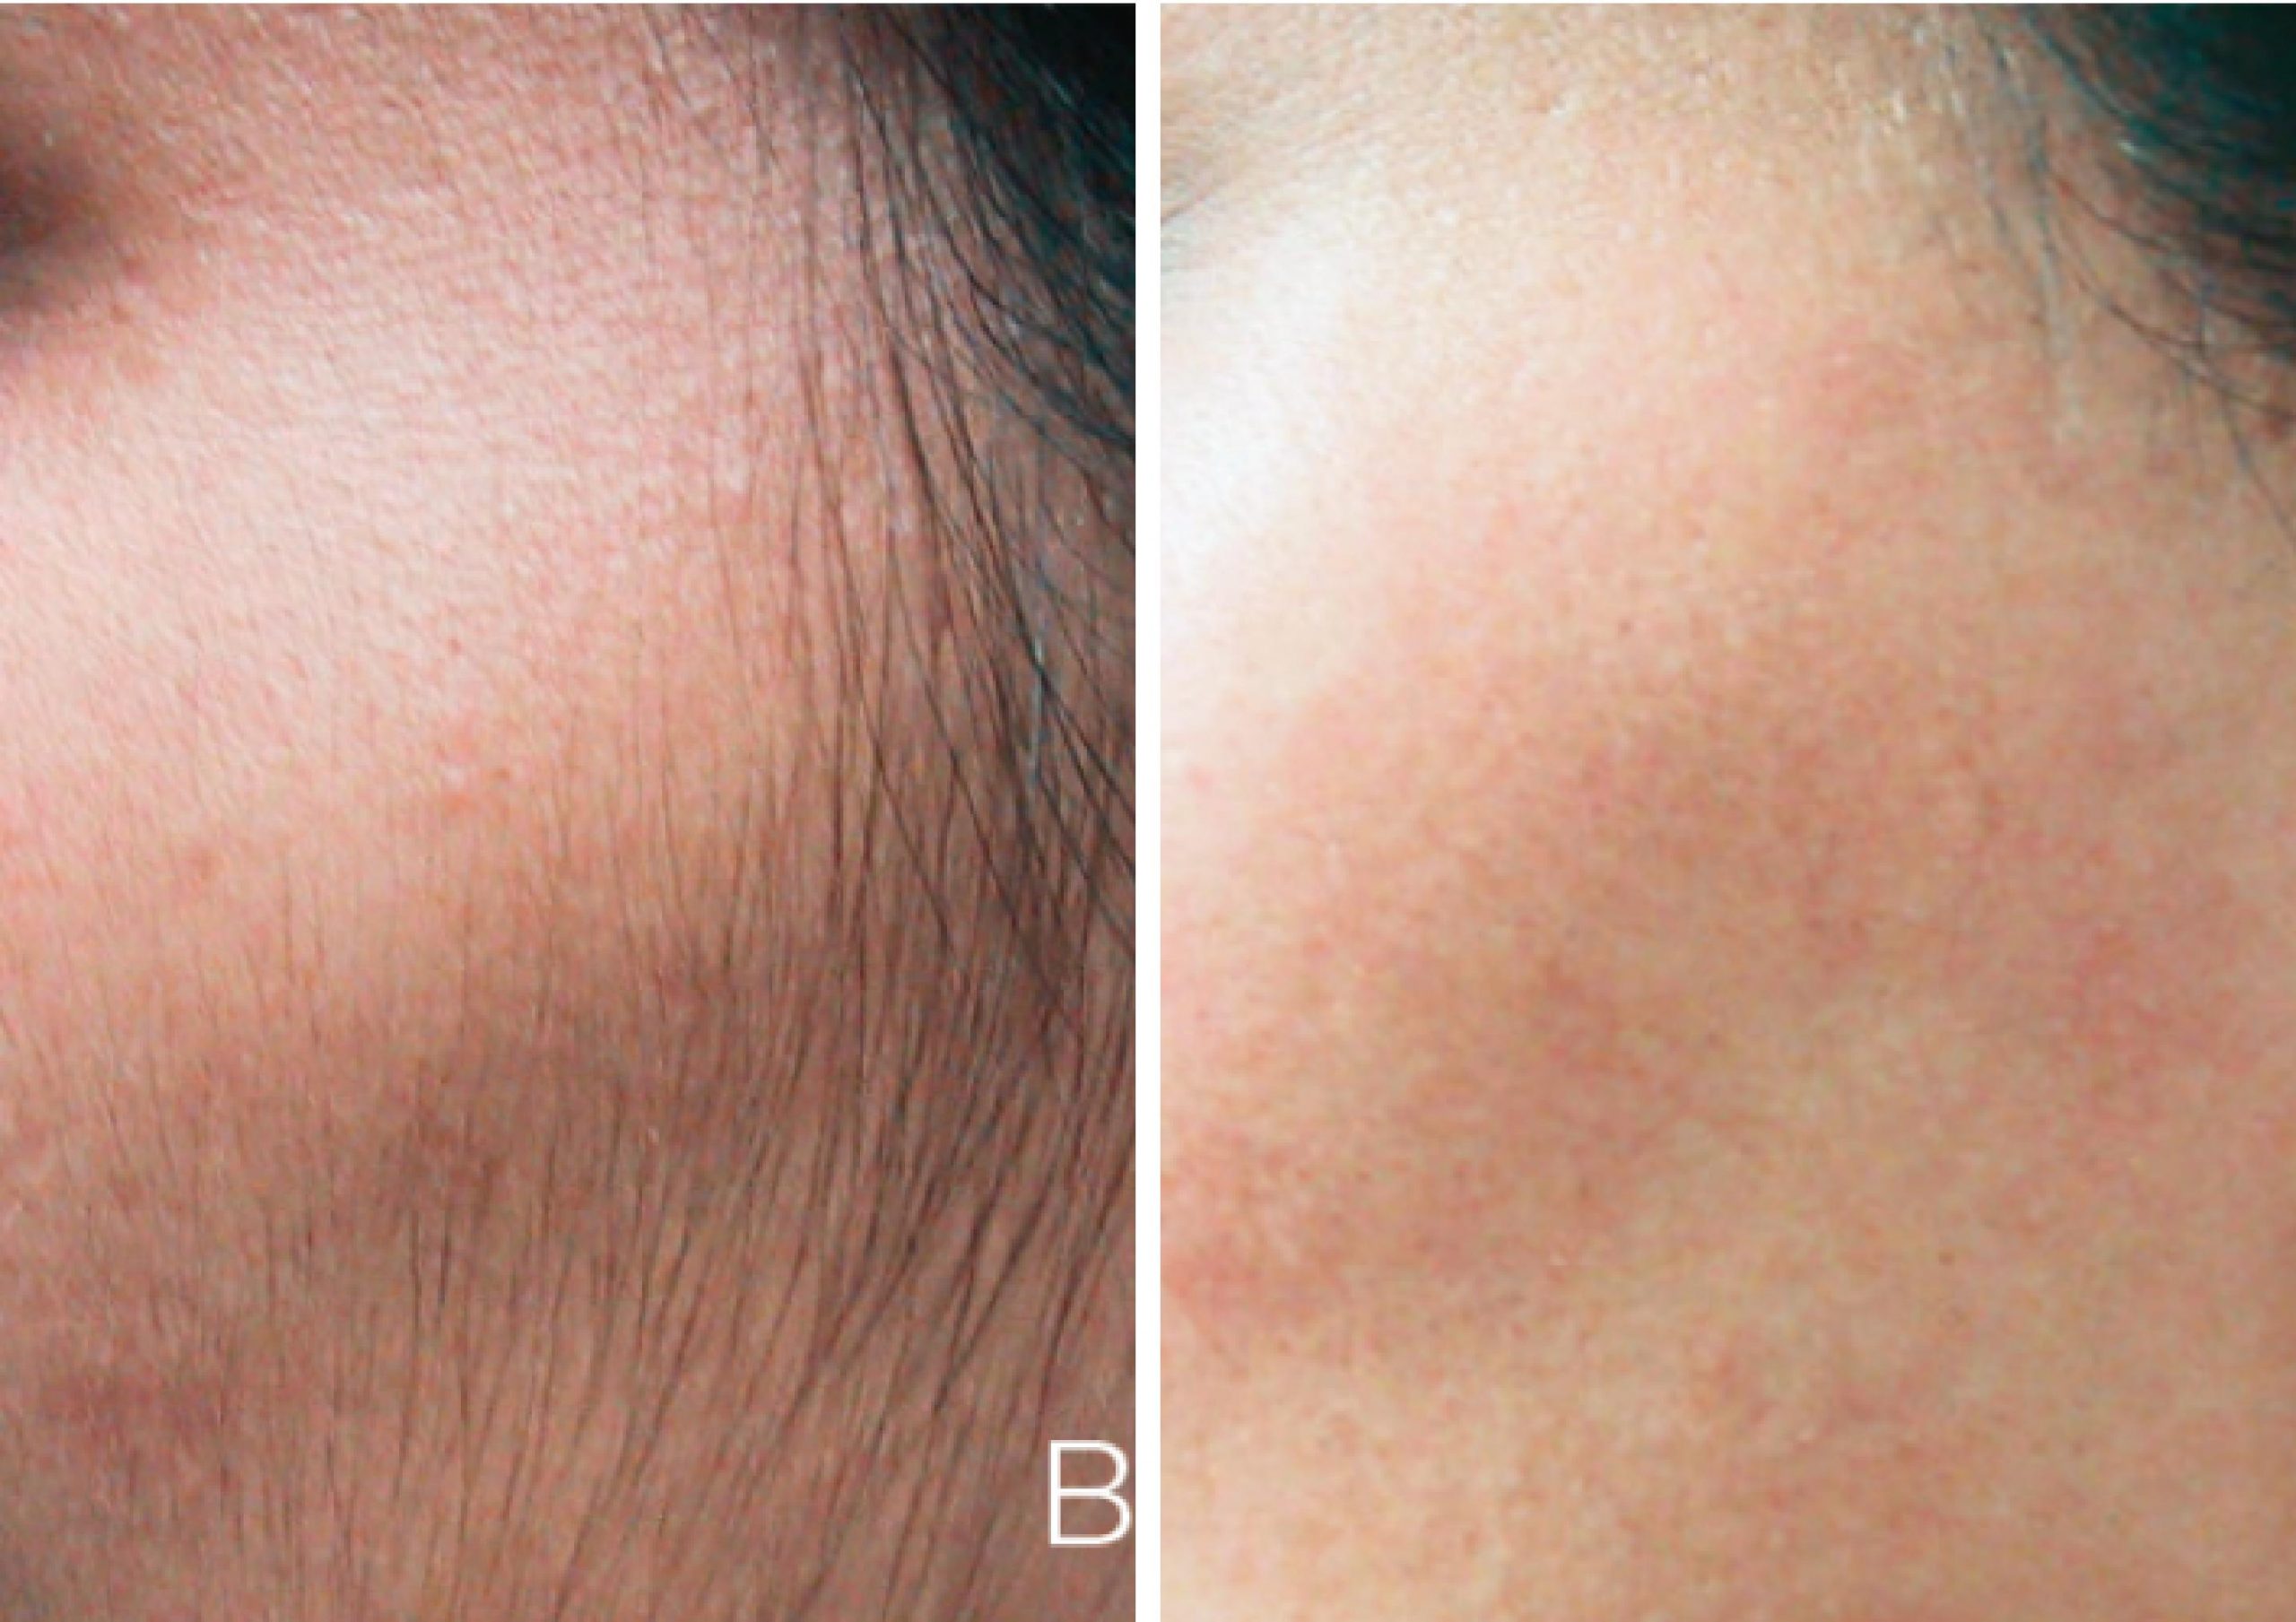 Laser Hair Removal before and after results to cheek area.